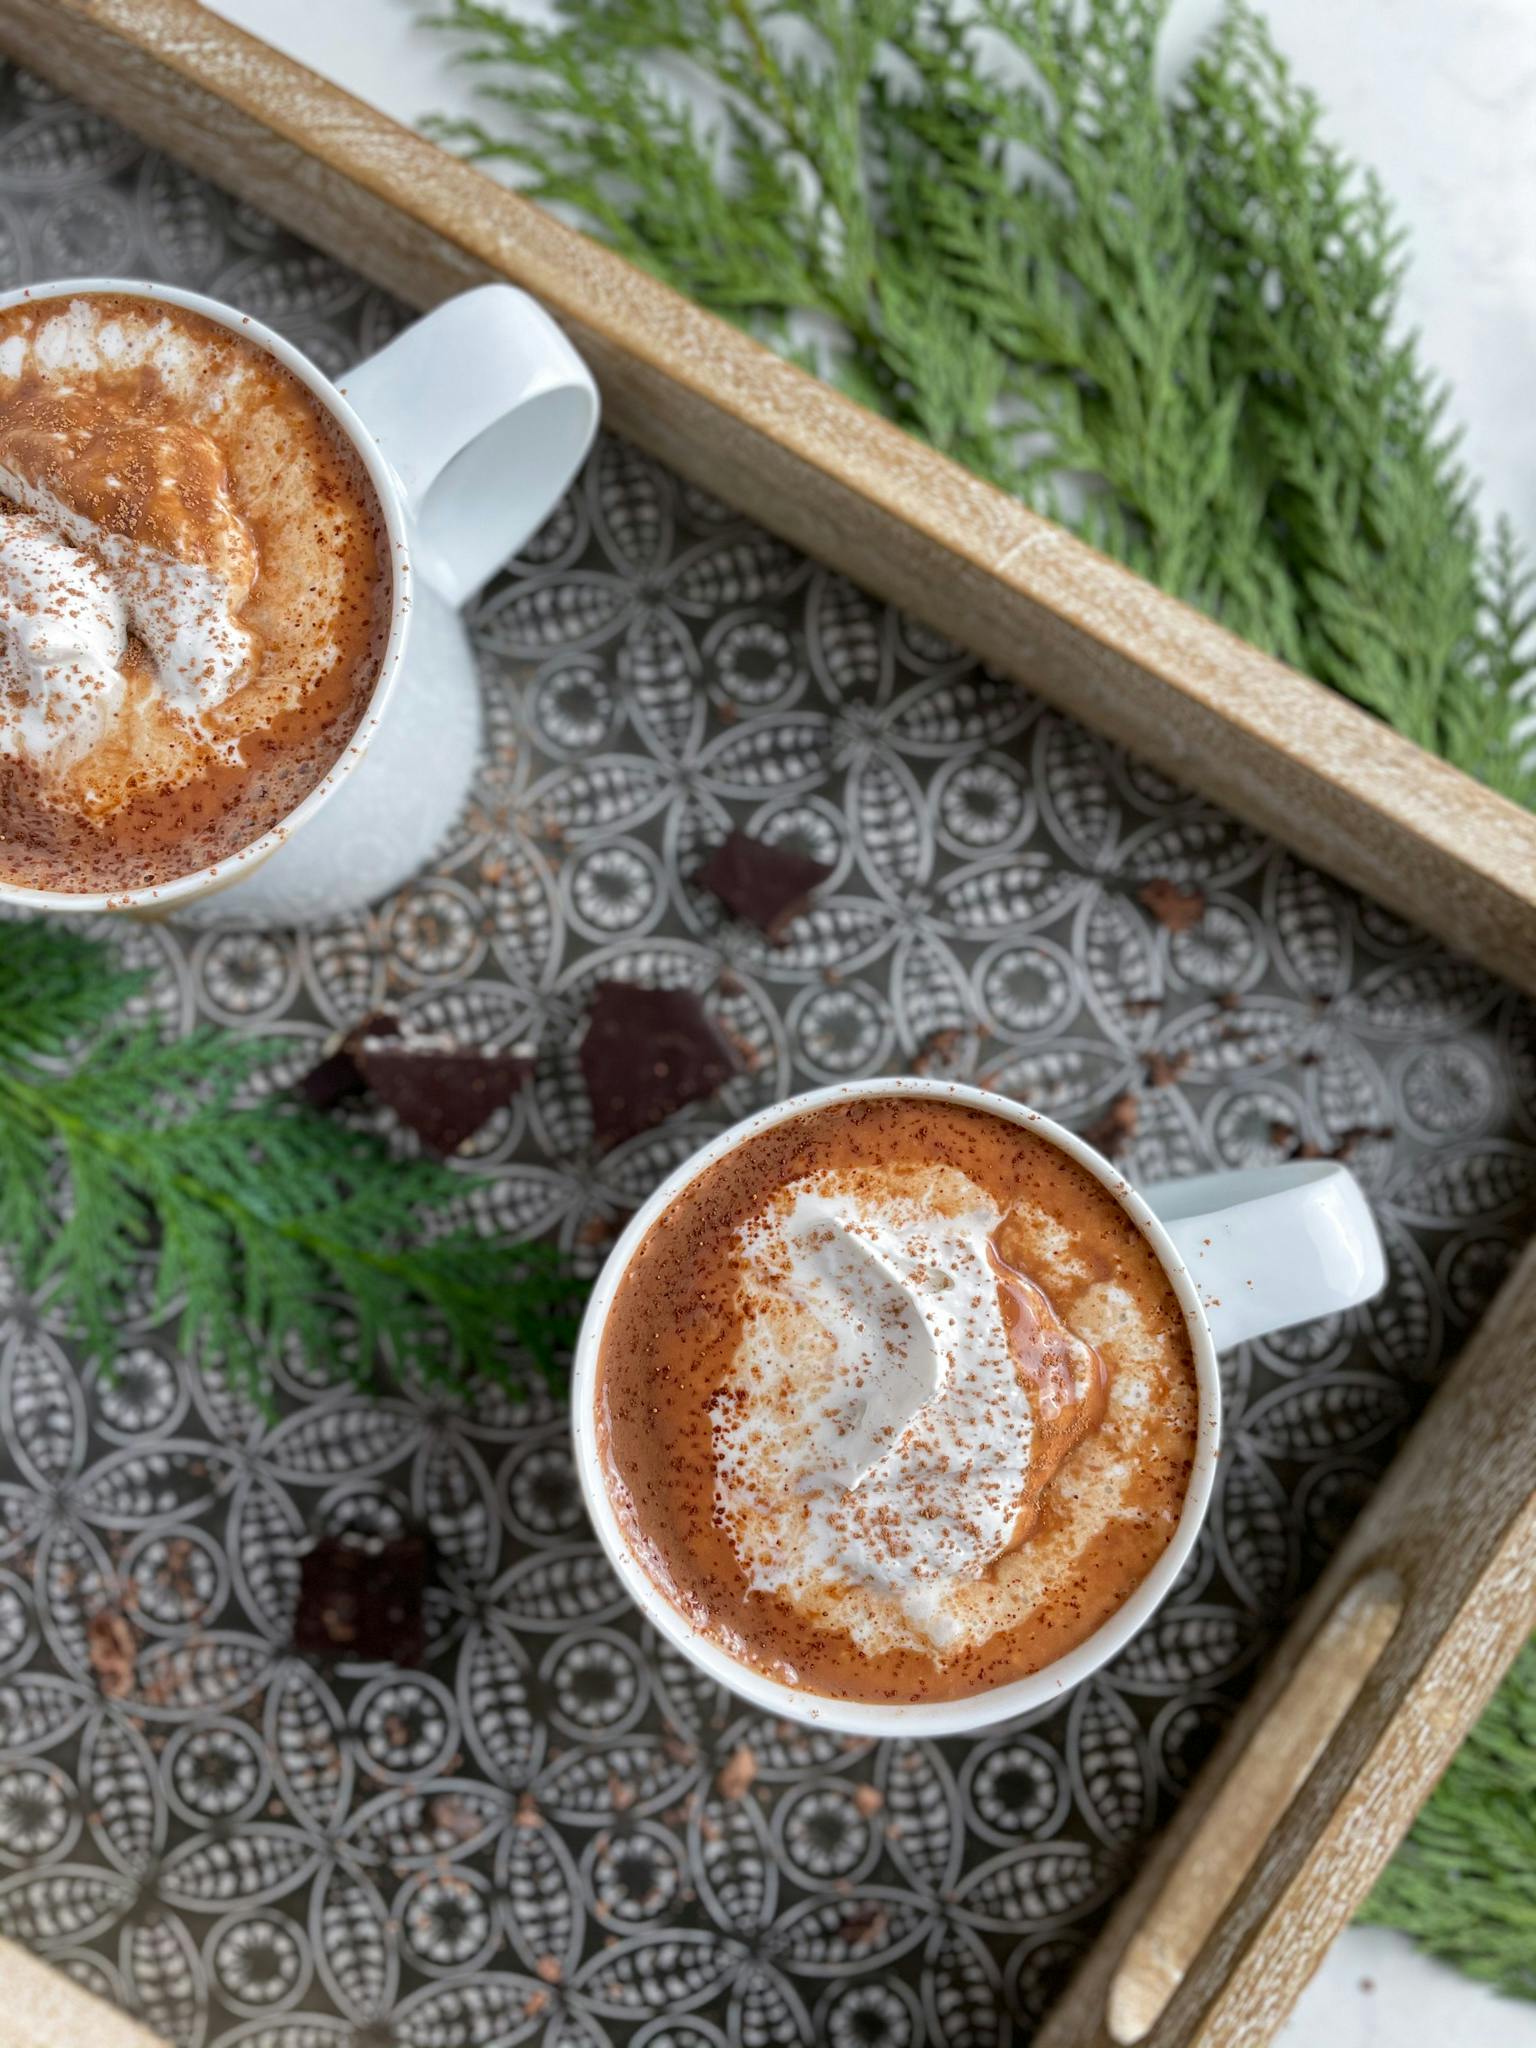 Two mugs of healthy hot chocolate on a tray.